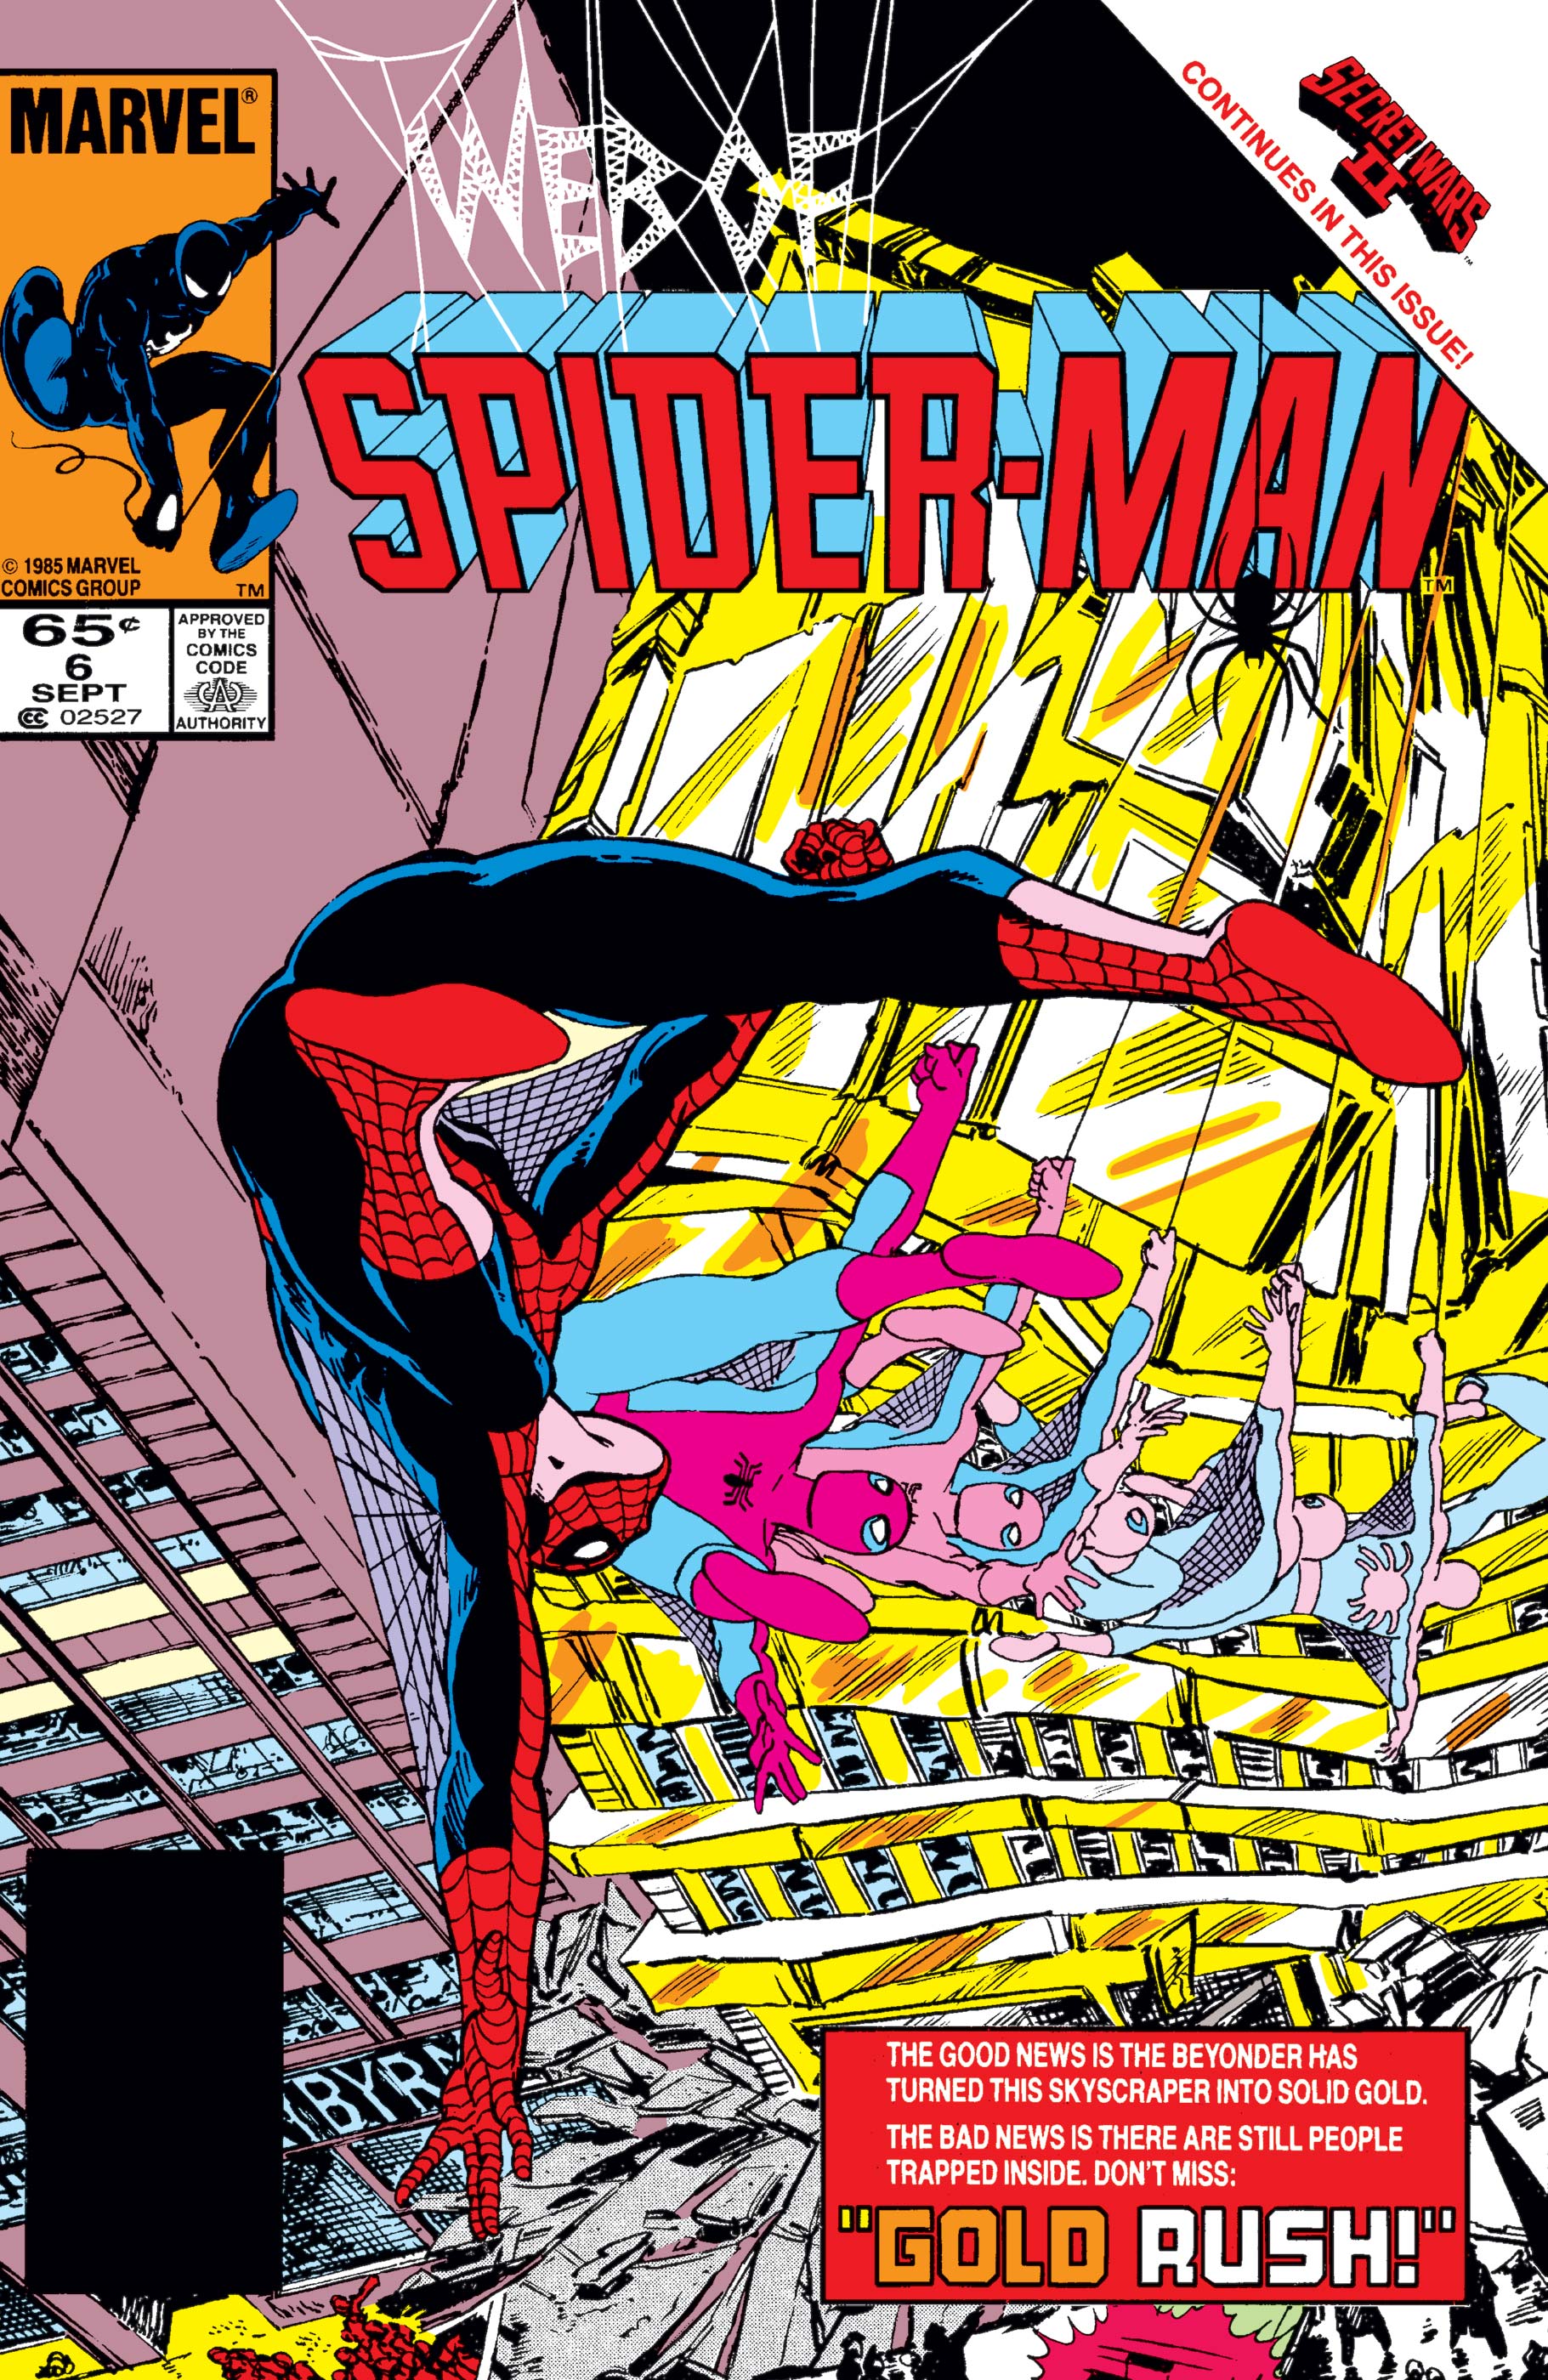 Web of Spider-Man (1985) #6 | Comic Issues | Marvel